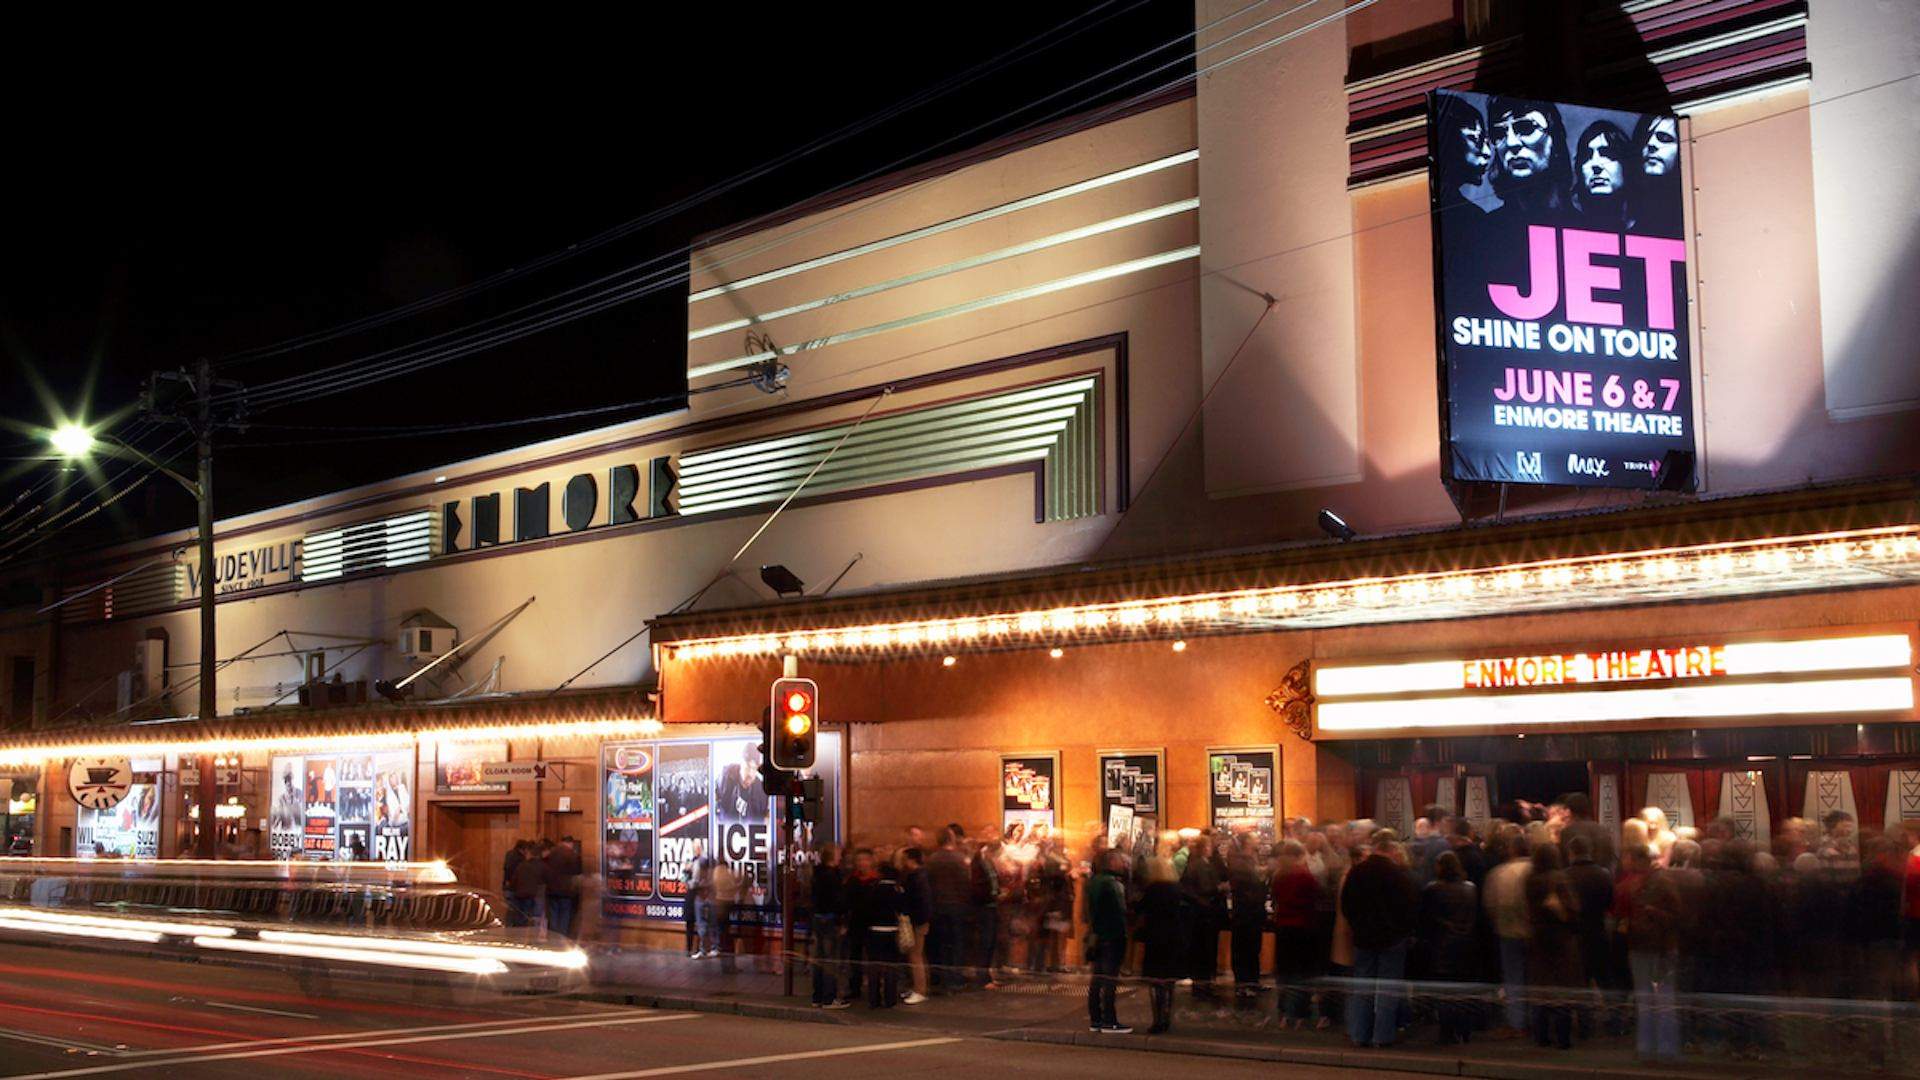 A Newly Refurbished and Restored Enmore Theatre Is Reopening Next Week After an 11-Month Hiatus